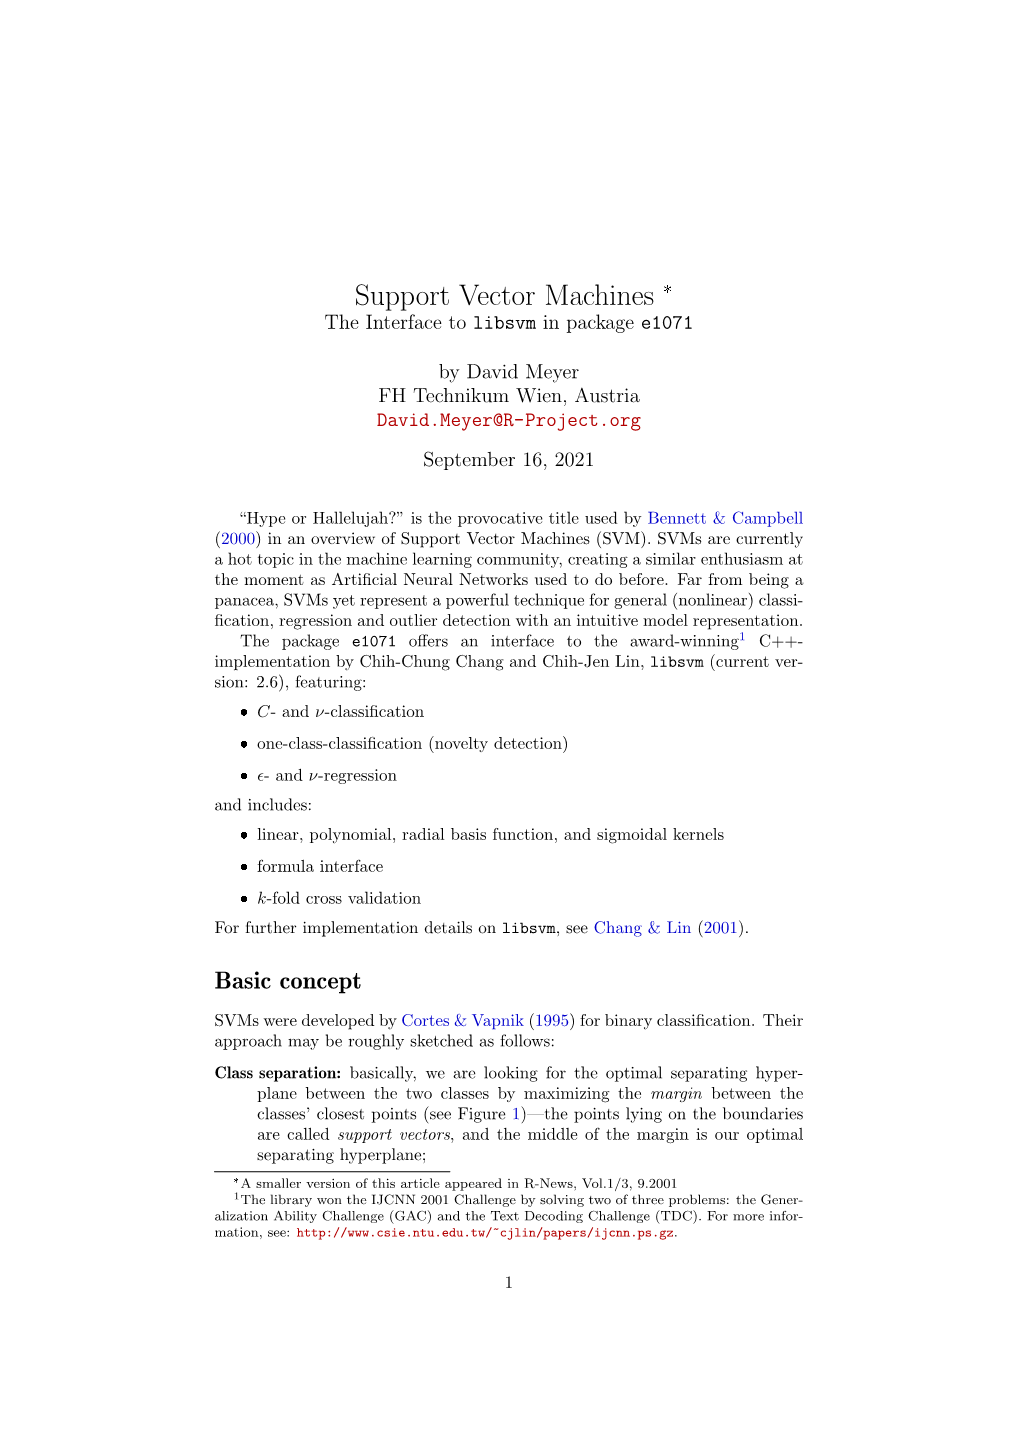 Support Vector Machines—The Interface to Libsvm in Package E1071